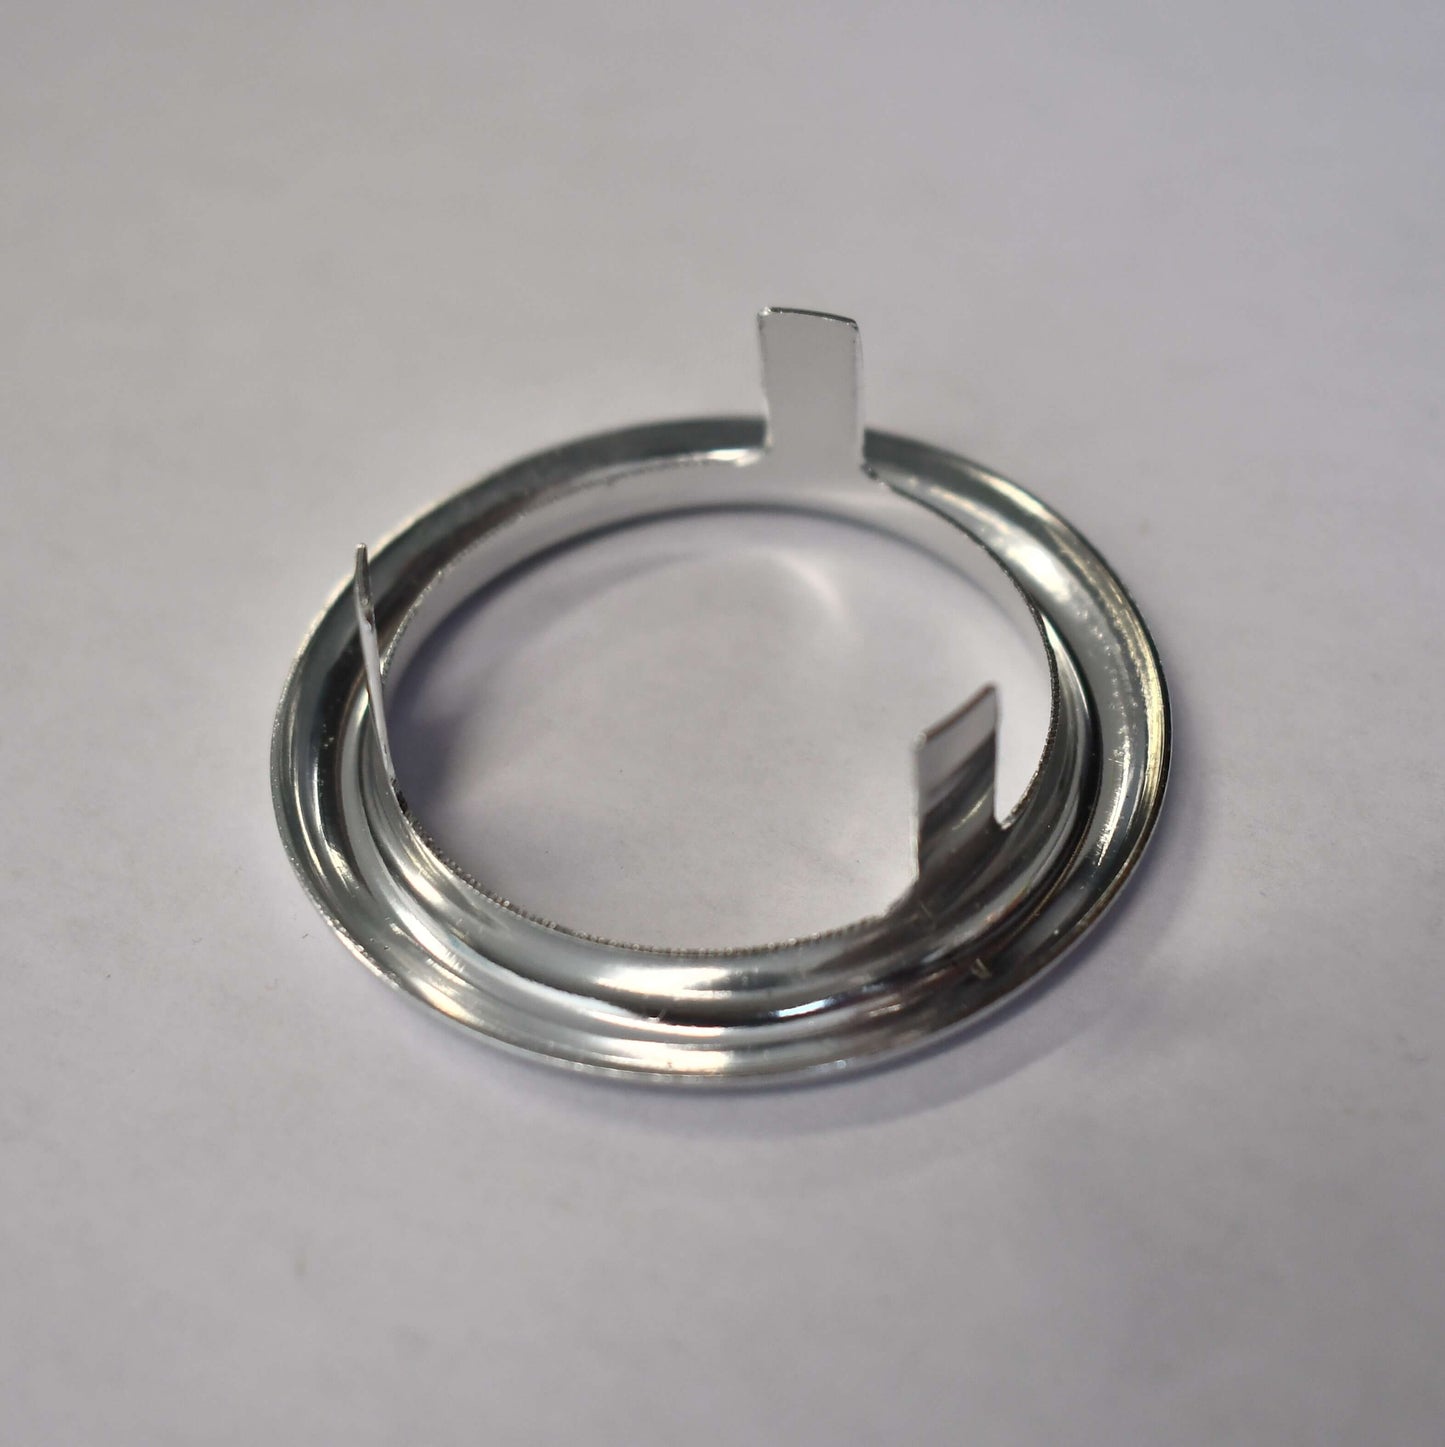 Ignition Trim Ring - Who has one?